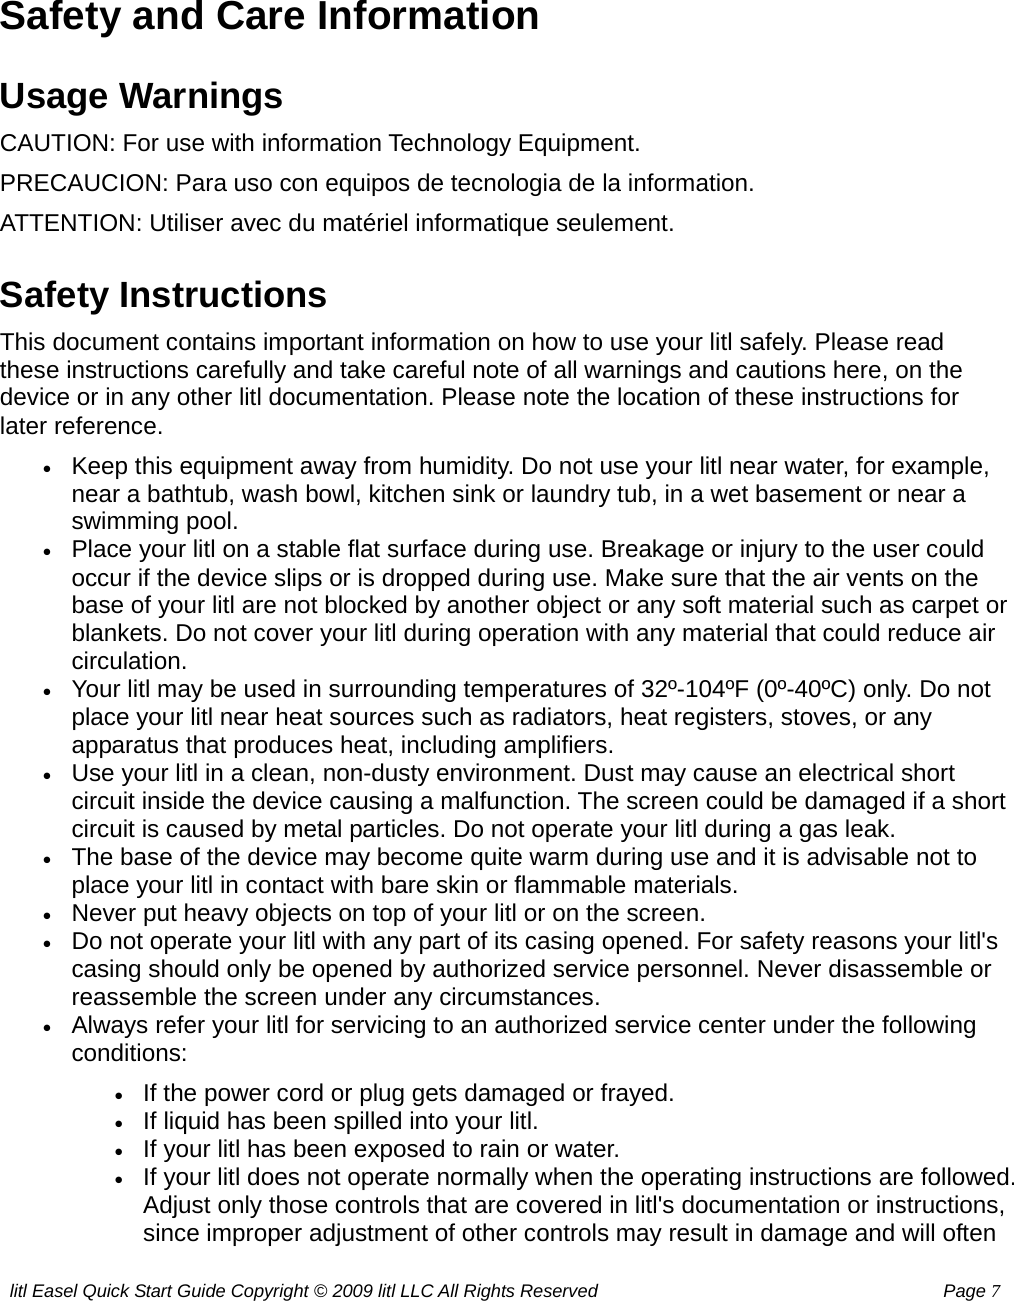 litl Easel Quick Start Guide Copyright © 2009 litl LLC All Rights Reserved          Page 7  Safety and Care Information Usage Warnings CAUTION: For use with information Technology Equipment. PRECAUCION: Para uso con equipos de tecnologia de la information. ATTENTION: Utiliser avec du matériel informatique seulement. Safety Instructions This document contains important information on how to use your litl safely. Please read these instructions carefully and take careful note of all warnings and cautions here, on the device or in any other litl documentation. Please note the location of these instructions for later reference. • Keep this equipment away from humidity. Do not use your litl near water, for example, near a bathtub, wash bowl, kitchen sink or laundry tub, in a wet basement or near a swimming pool.   • Place your litl on a stable flat surface during use. Breakage or injury to the user could occur if the device slips or is dropped during use. Make sure that the air vents on the base of your litl are not blocked by another object or any soft material such as carpet or blankets. Do not cover your litl during operation with any material that could reduce air circulation.  • Your litl may be used in surrounding temperatures of 32º-104ºF (0º-40ºC) only. Do not place your litl near heat sources such as radiators, heat registers, stoves, or any apparatus that produces heat, including amplifiers.   • Use your litl in a clean, non-dusty environment. Dust may cause an electrical short circuit inside the device causing a malfunction. The screen could be damaged if a short circuit is caused by metal particles. Do not operate your litl during a gas leak.   • The base of the device may become quite warm during use and it is advisable not to place your litl in contact with bare skin or flammable materials.   • Never put heavy objects on top of your litl or on the screen.   • Do not operate your litl with any part of its casing opened. For safety reasons your litl&apos;s casing should only be opened by authorized service personnel. Never disassemble or reassemble the screen under any circumstances.   • Always refer your litl for servicing to an authorized service center under the following conditions: • If the power cord or plug gets damaged or frayed.   • If liquid has been spilled into your litl.   • If your litl has been exposed to rain or water.  • If your litl does not operate normally when the operating instructions are followed. Adjust only those controls that are covered in litl&apos;s documentation or instructions, since improper adjustment of other controls may result in damage and will often 